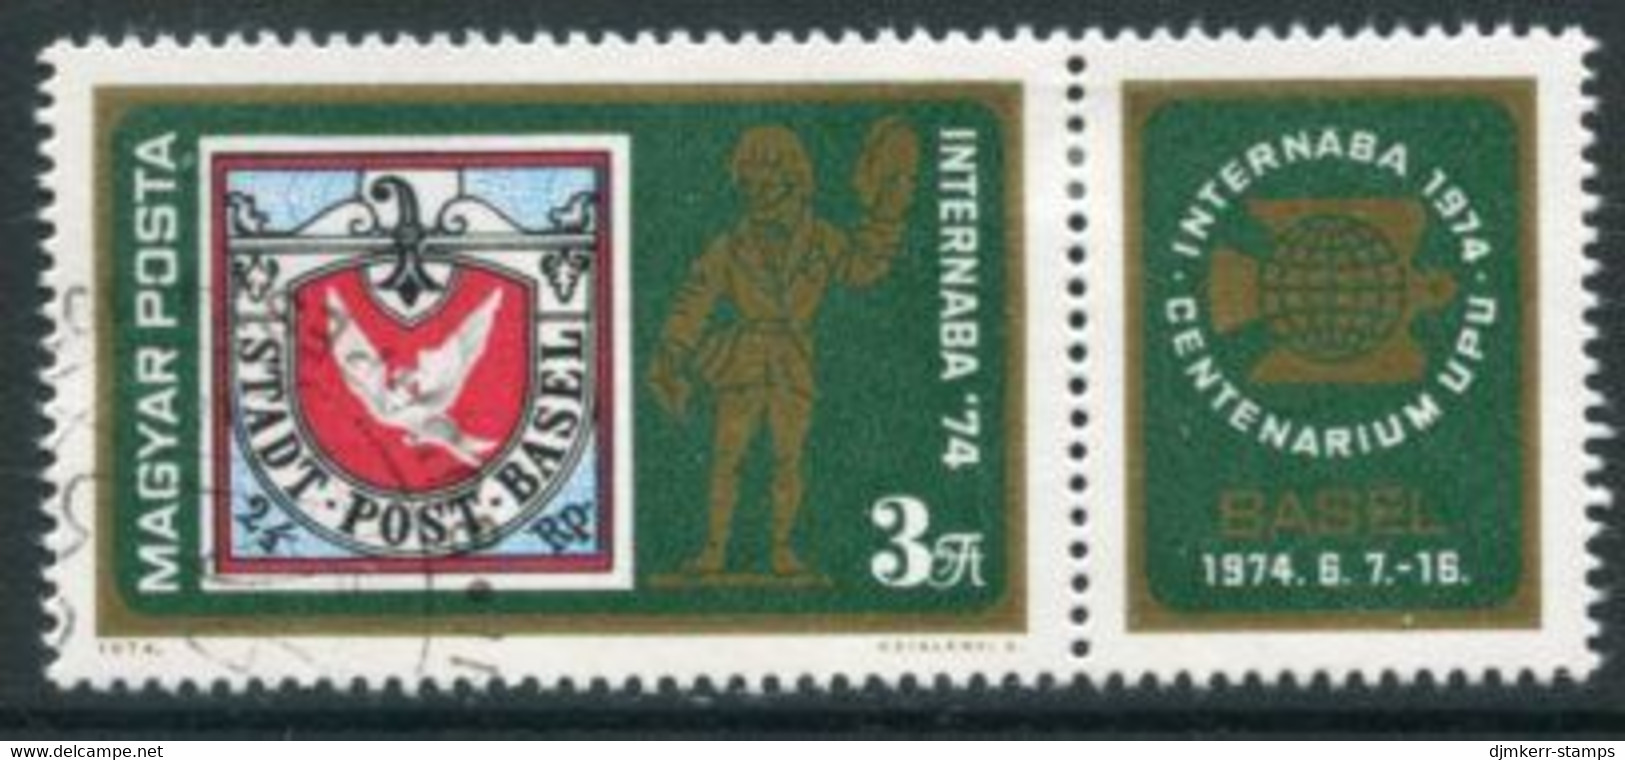 HUNGARY 1974 INTERNABA Stamp Exhibition Used.  Michel 2956 - Used Stamps